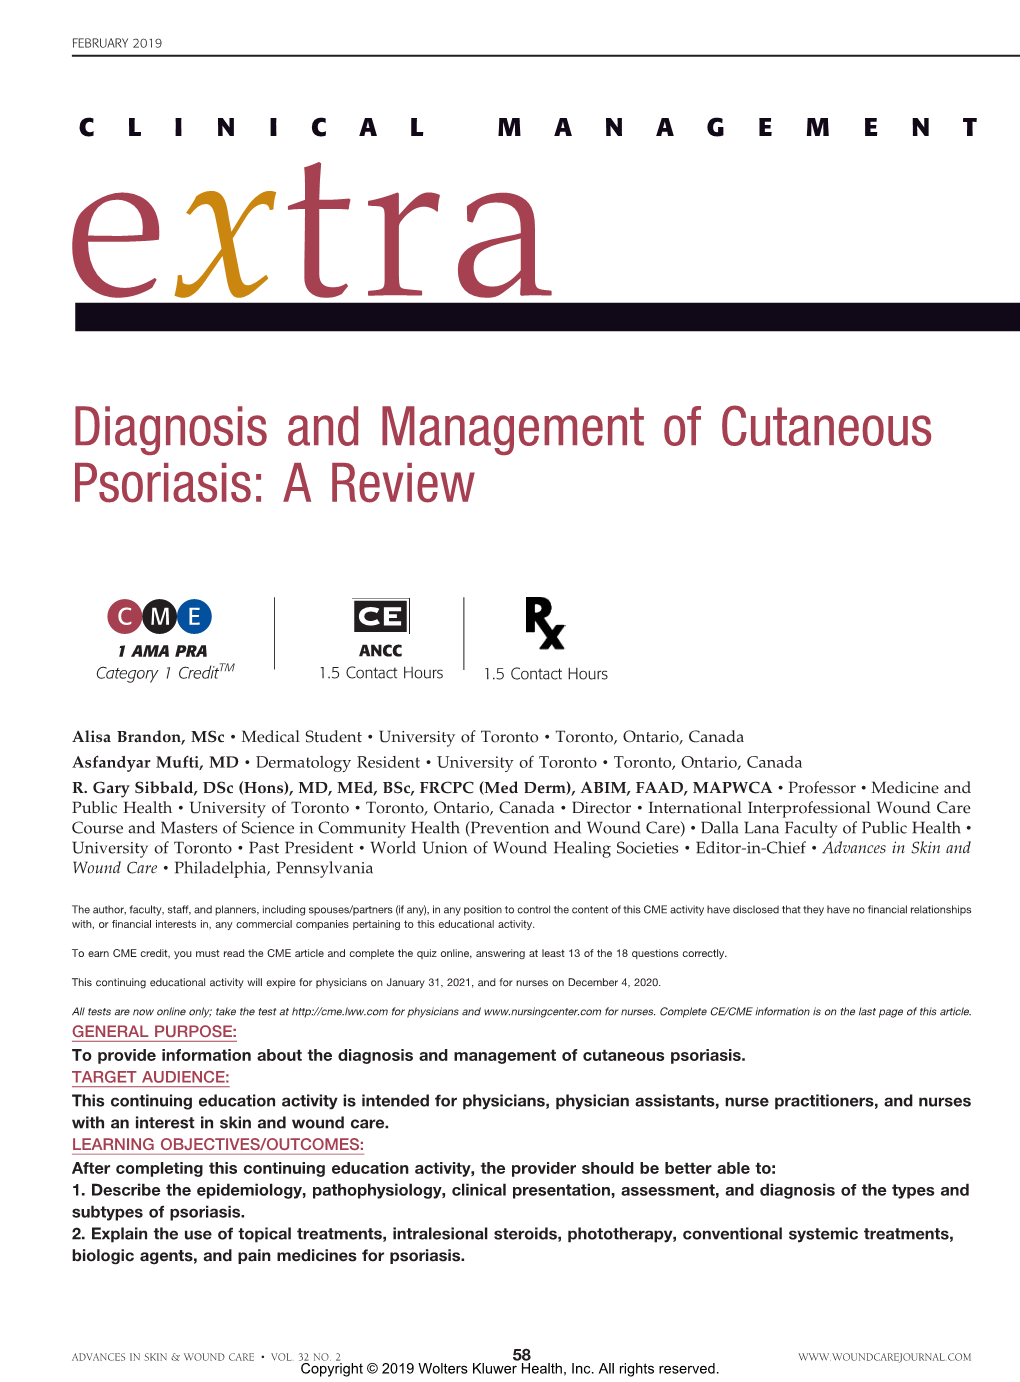 Diagnosis and Management of Cutaneous Psoriasis: a Review